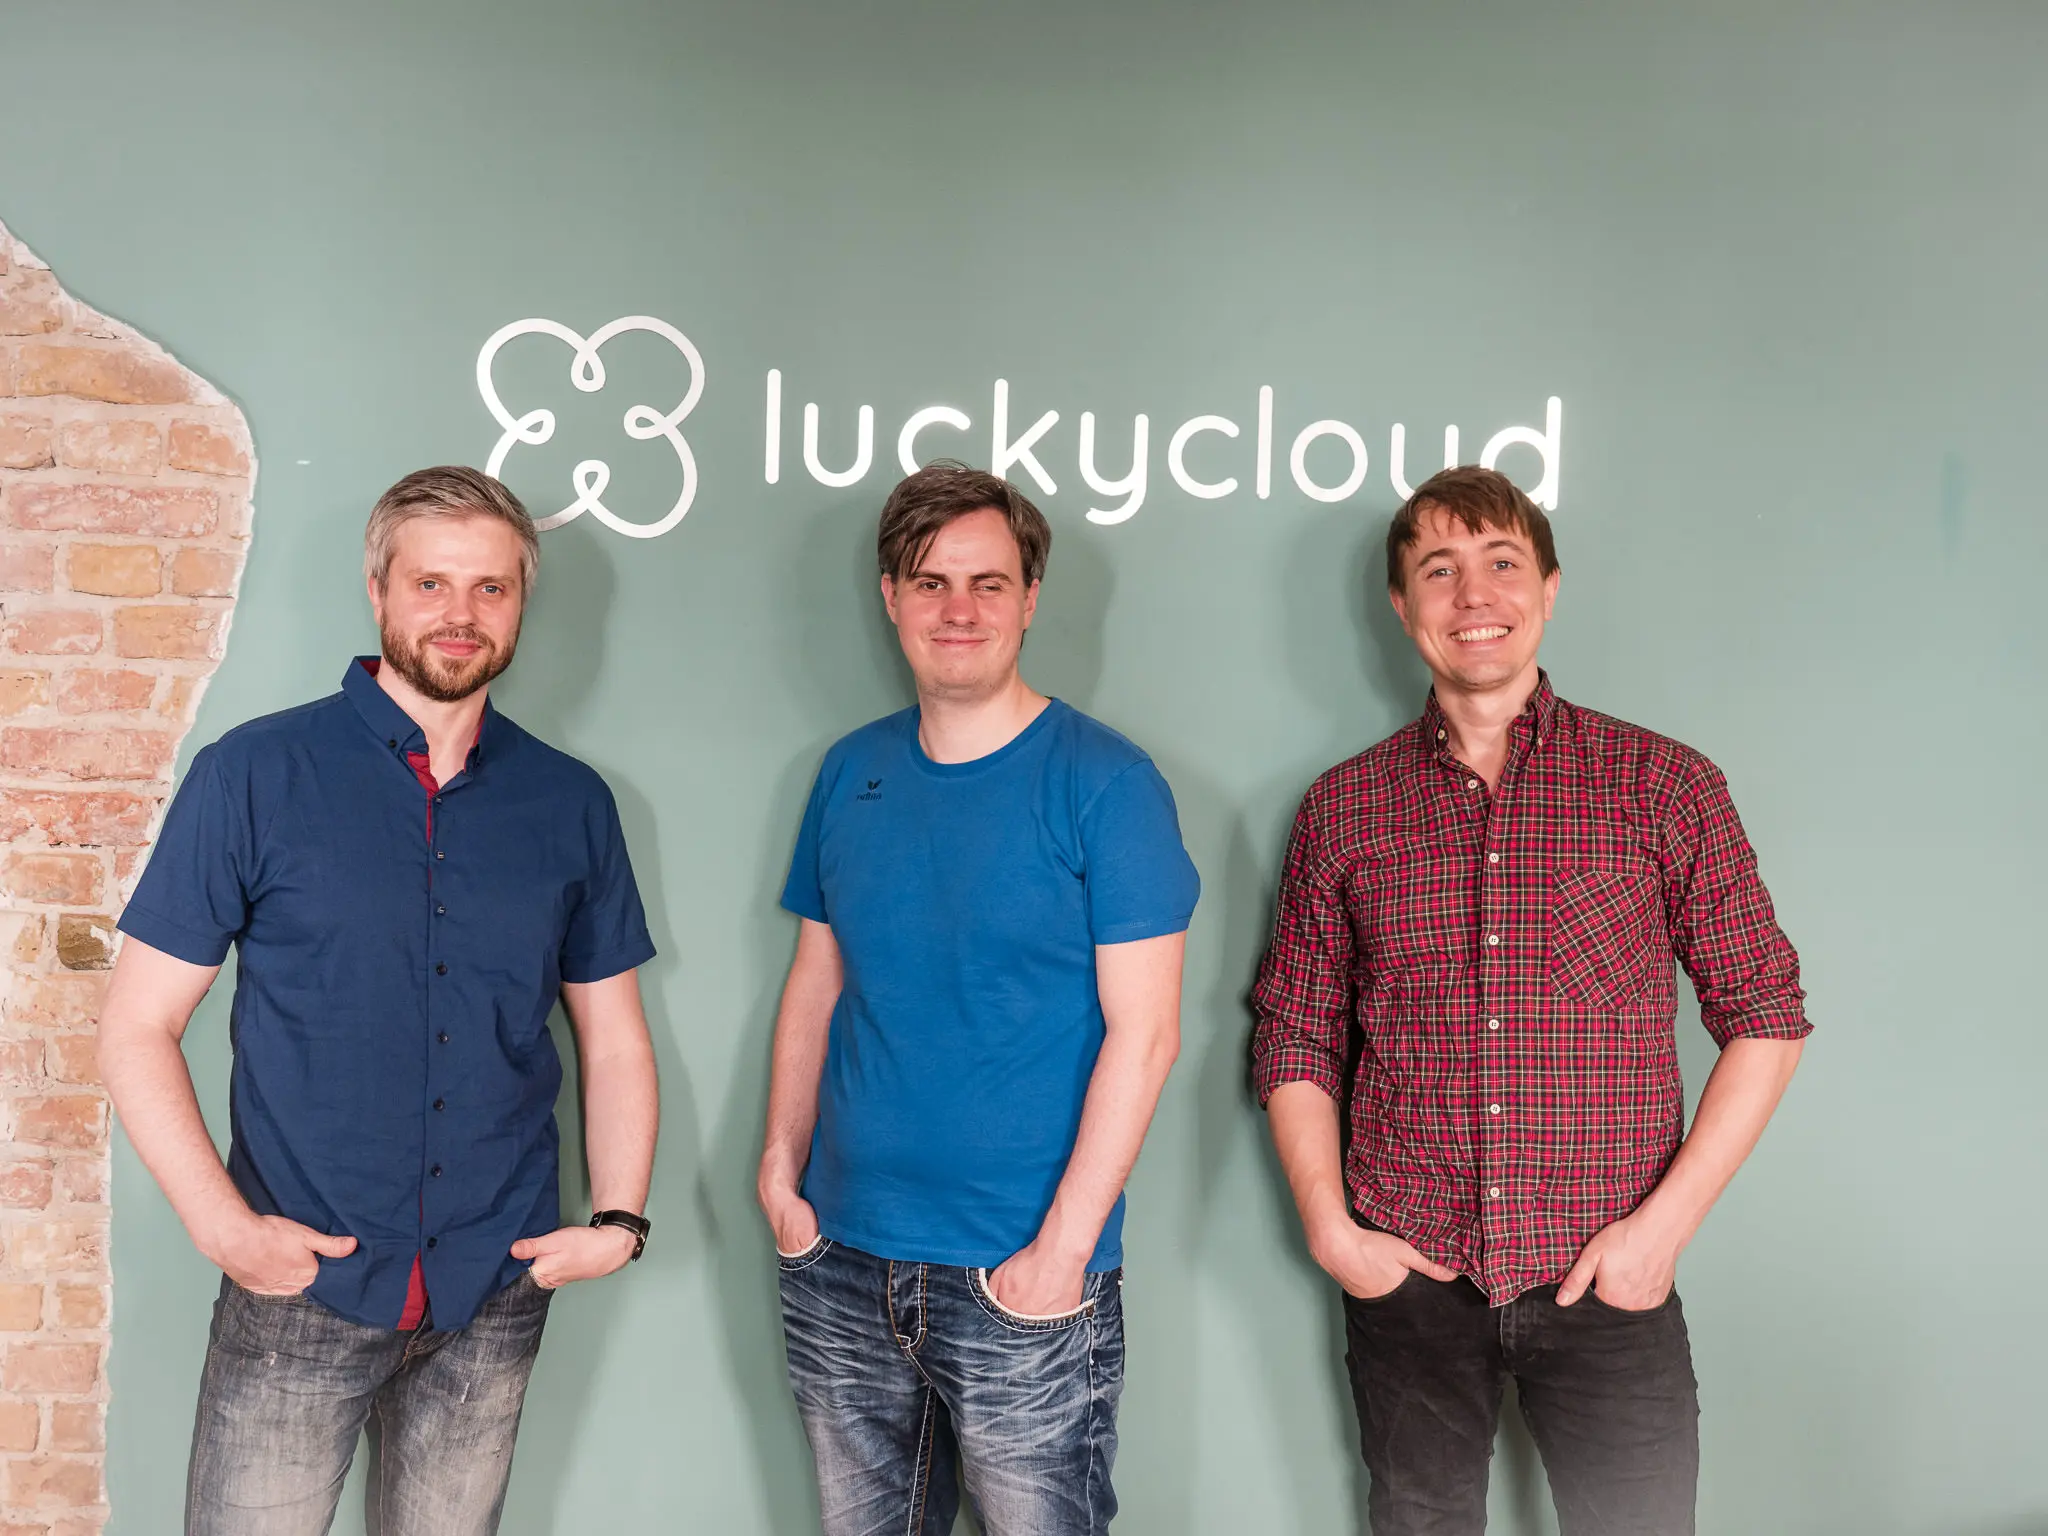 Three luckycloud employees position themselves in front of the company logo.